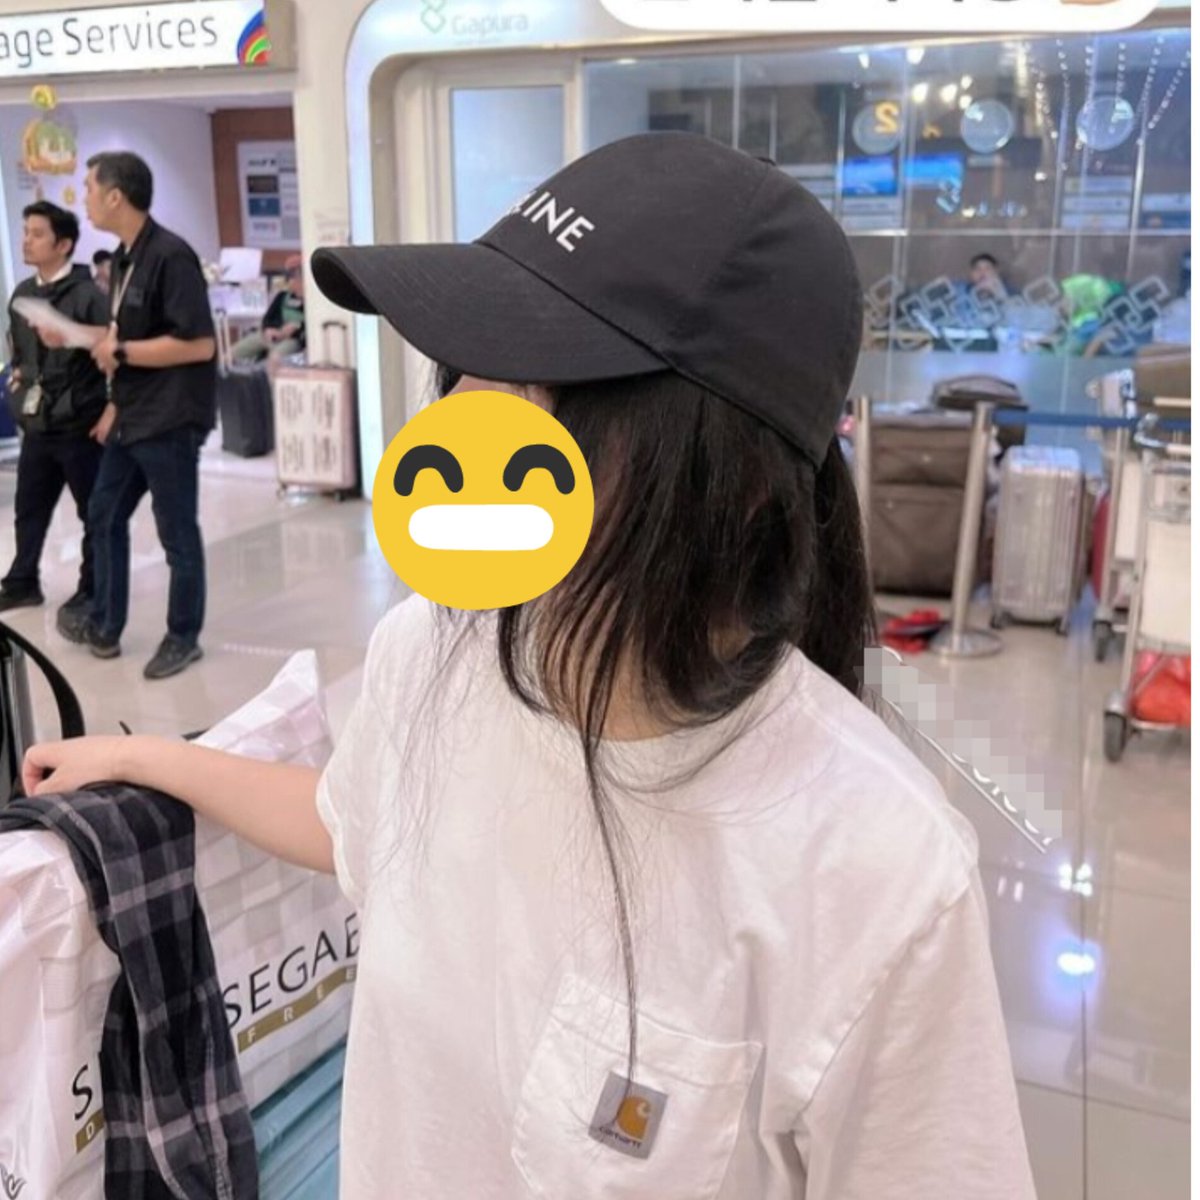 Jiwon's make up artist is wearing a carhartt t-shirt hahaha.
Maybe Jiwon and QoT team bought some items in Germany from the same brand.